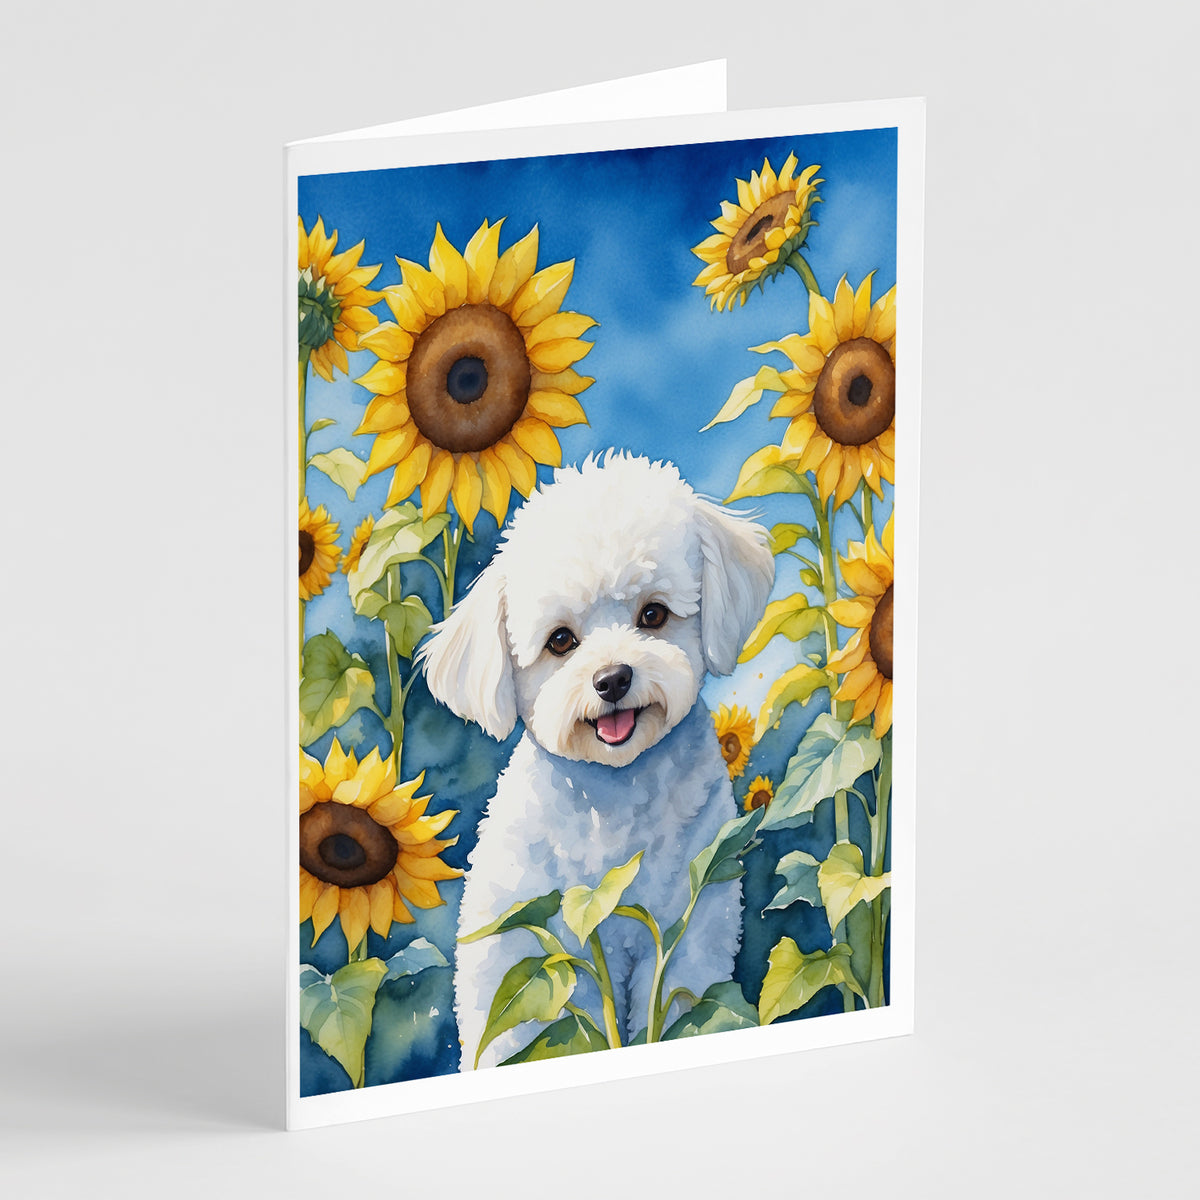 Buy this Bichon Frise in Sunflowers Greeting Cards Pack of 8